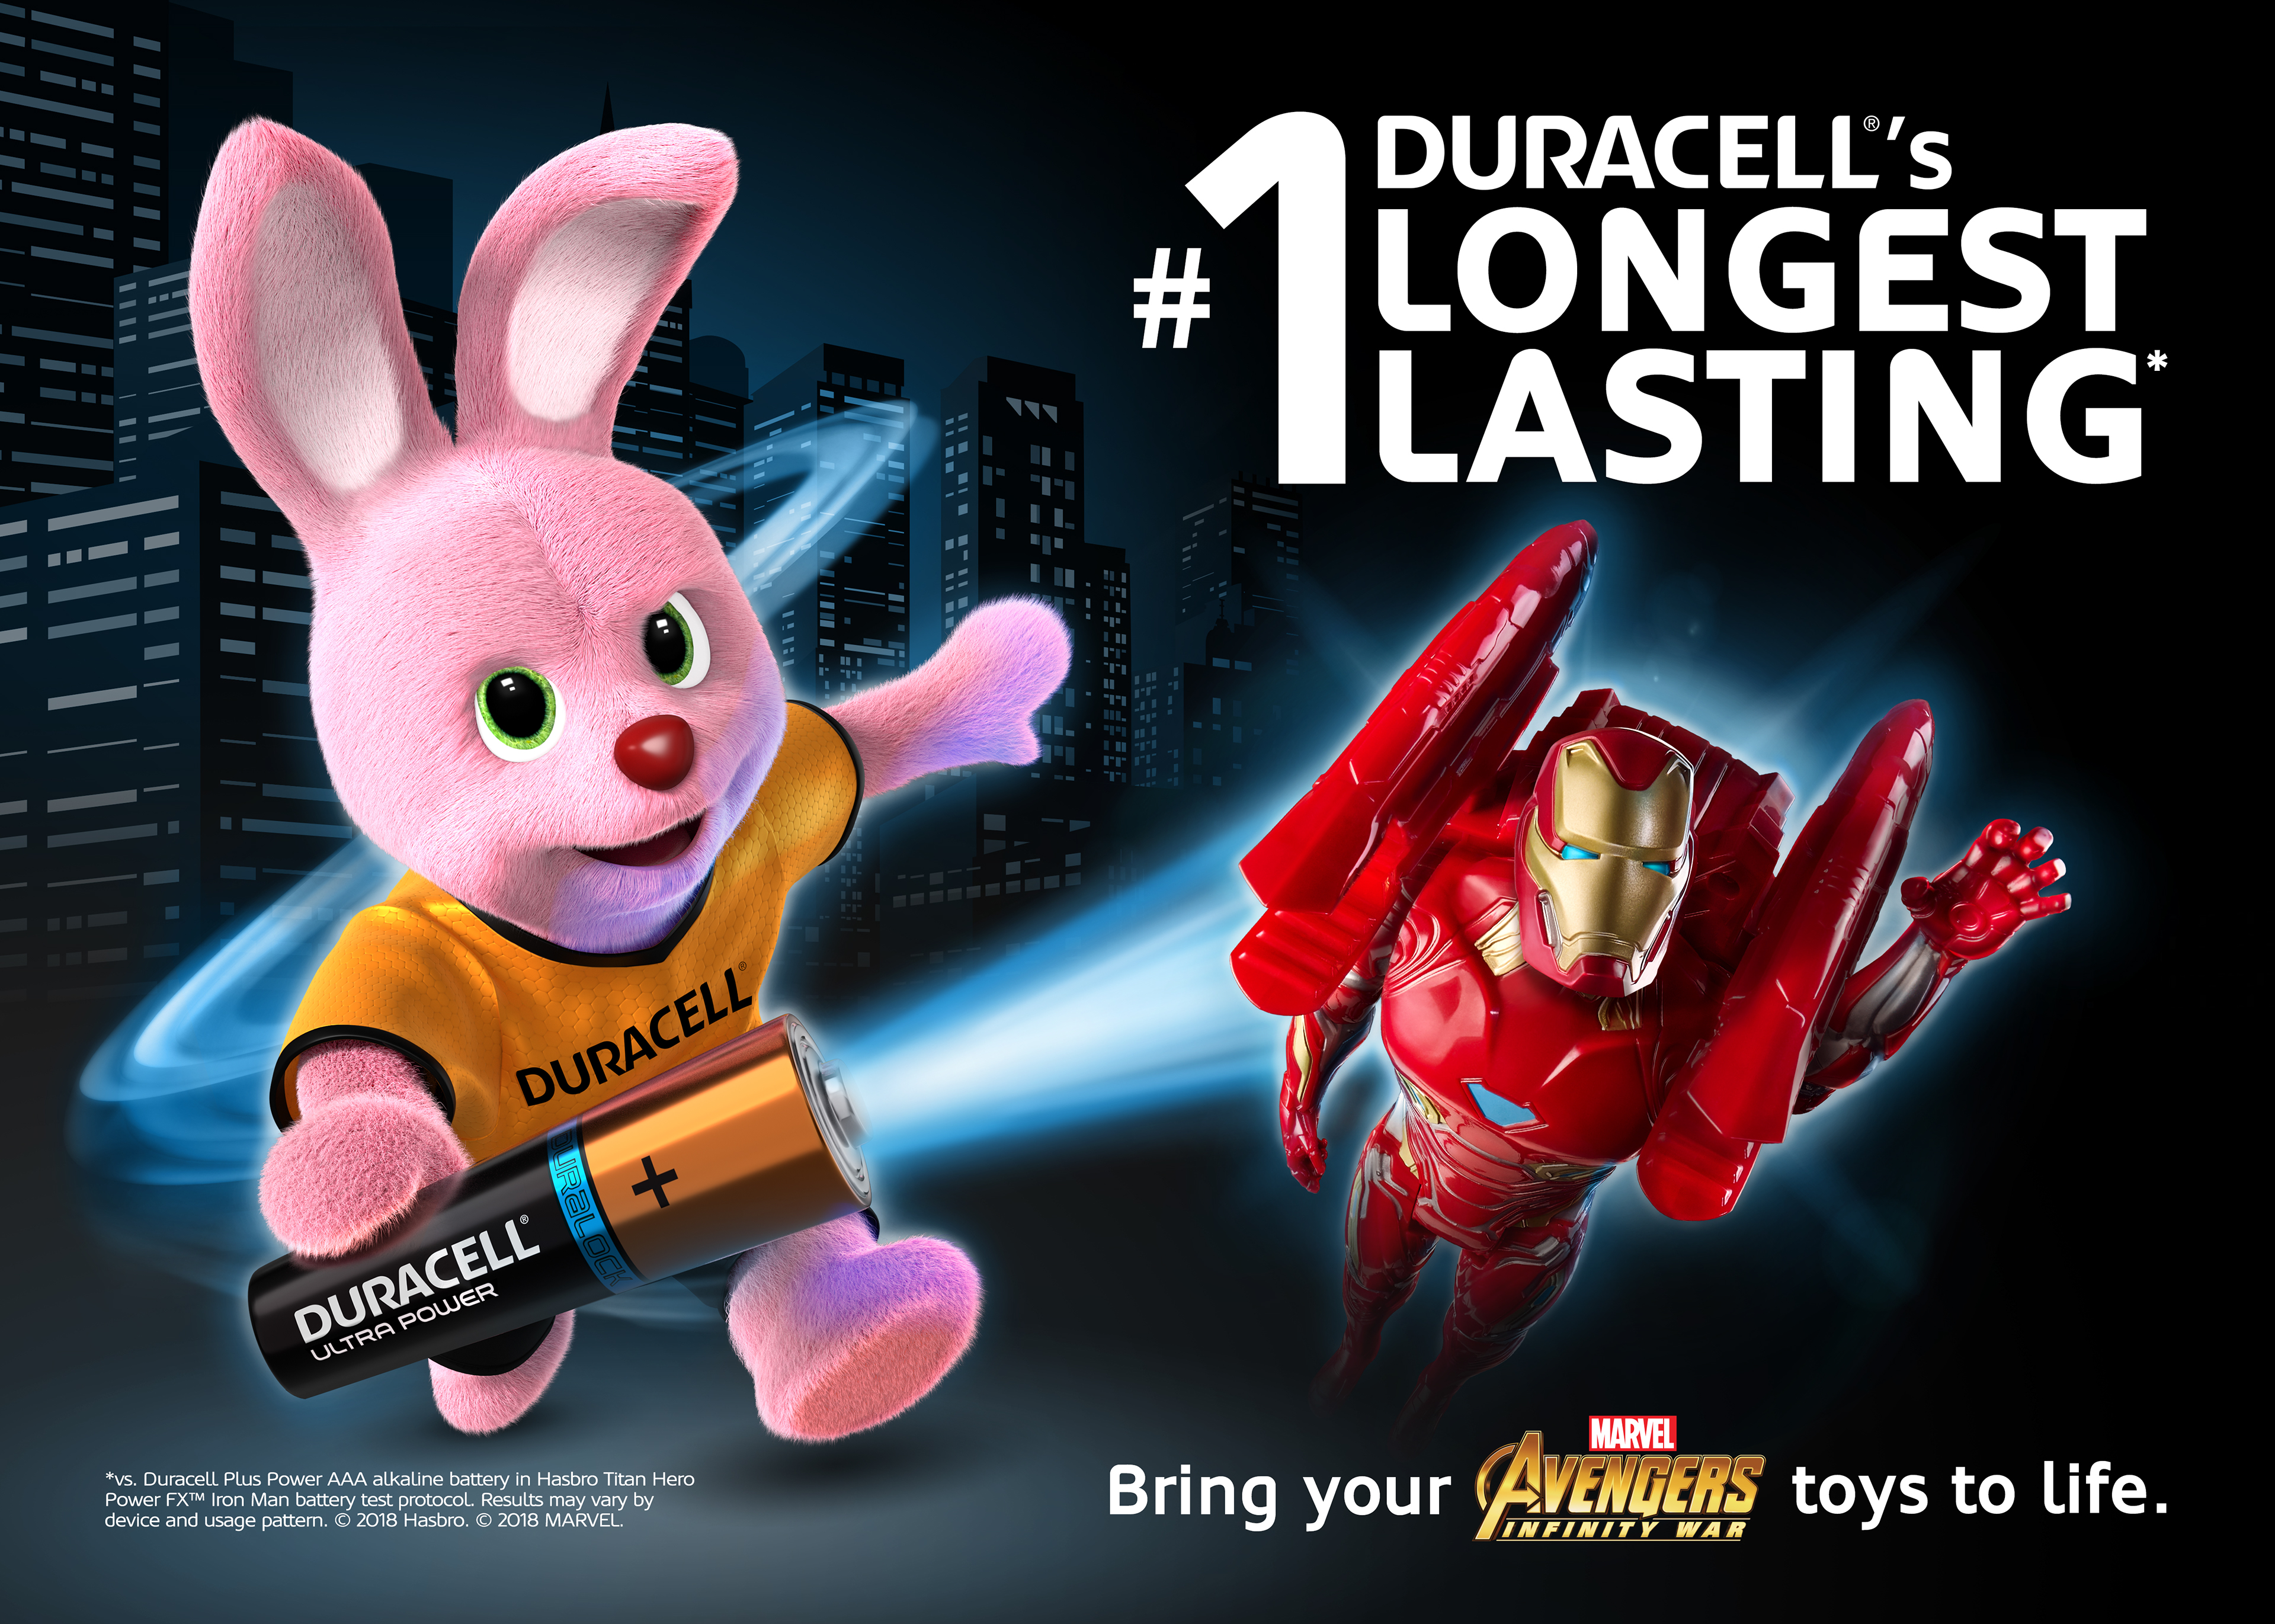 Live toys. Duracell Hase. Duracell Bunny. Дюрасел Пауэр чек. Реклама Дюрасел 2018.